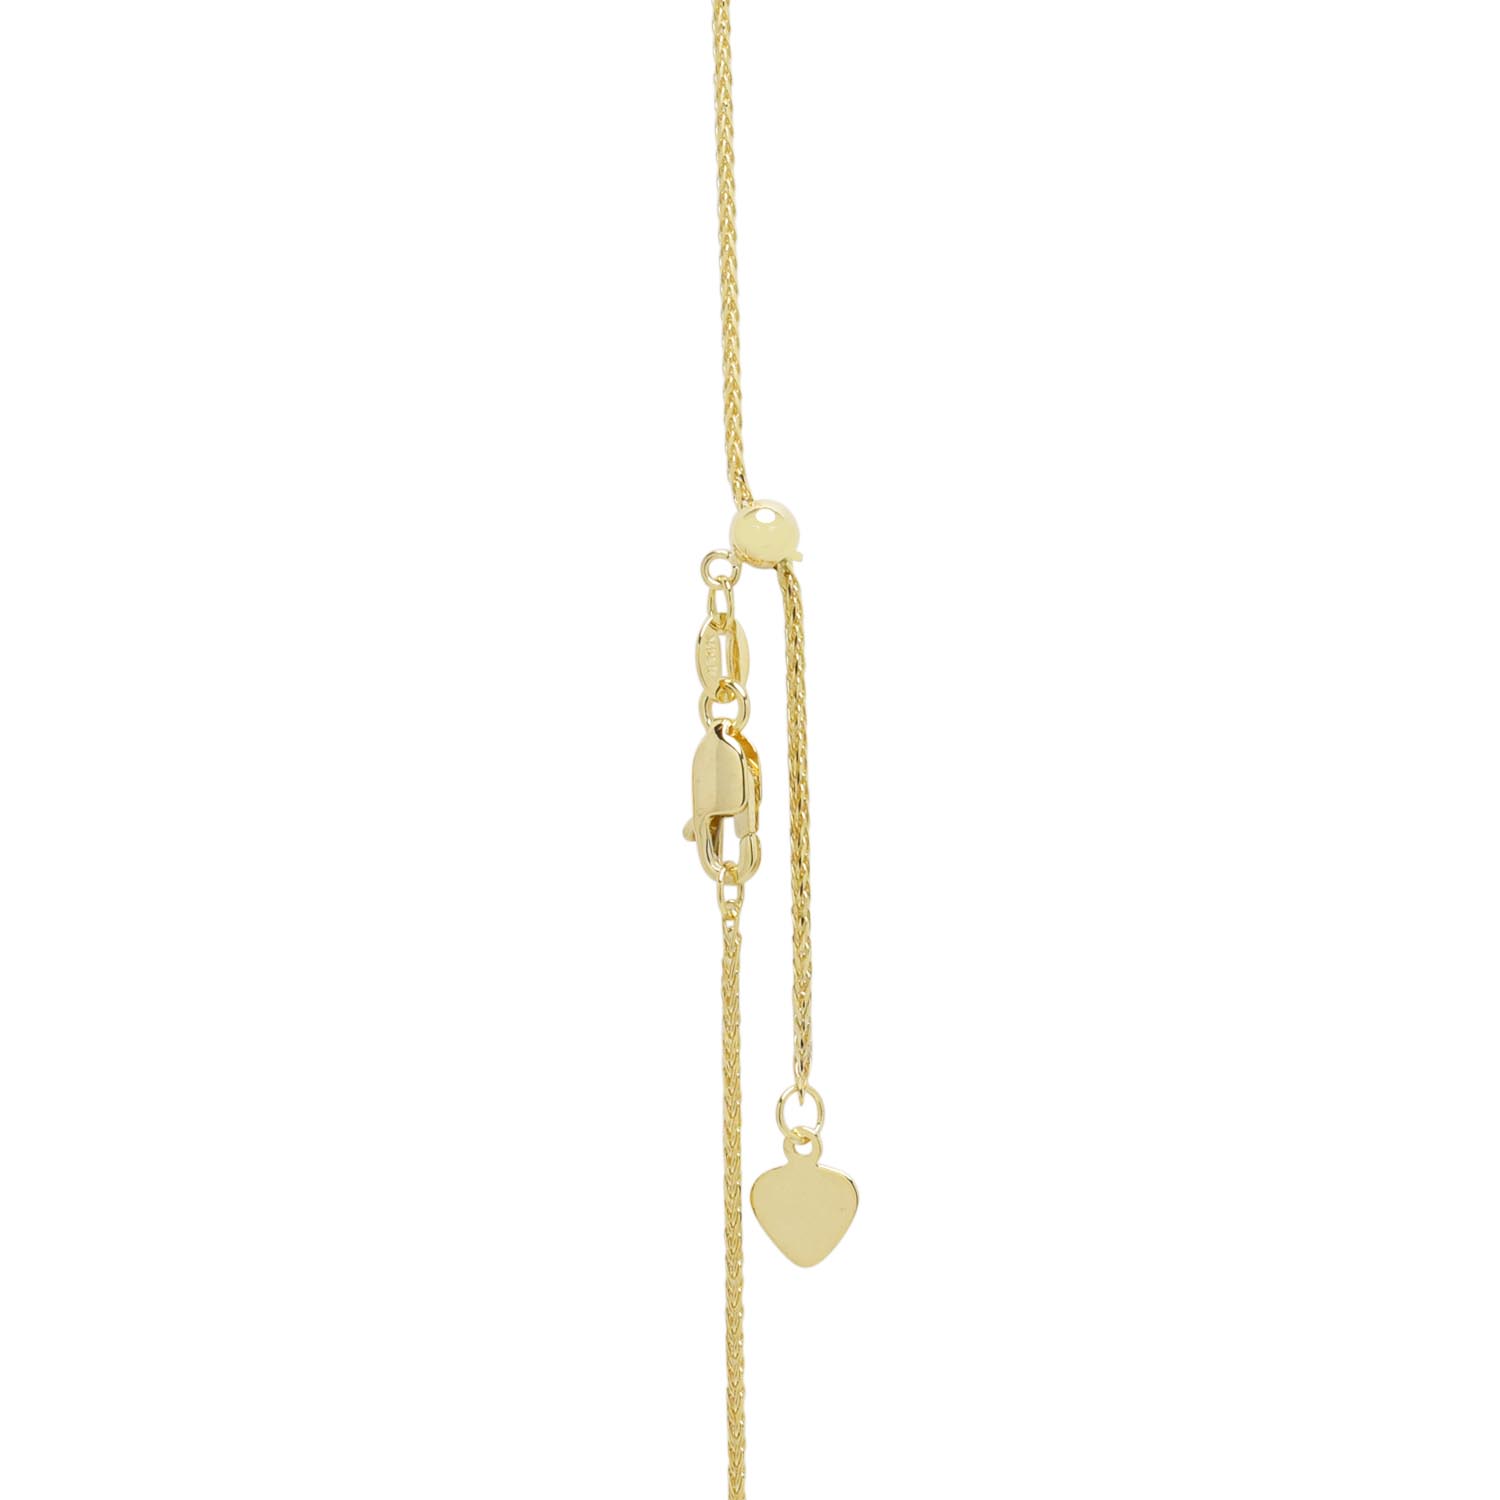 Adjustable Wheat Chain in 14kt Yellow Gold (26 inches and 1mm wide)